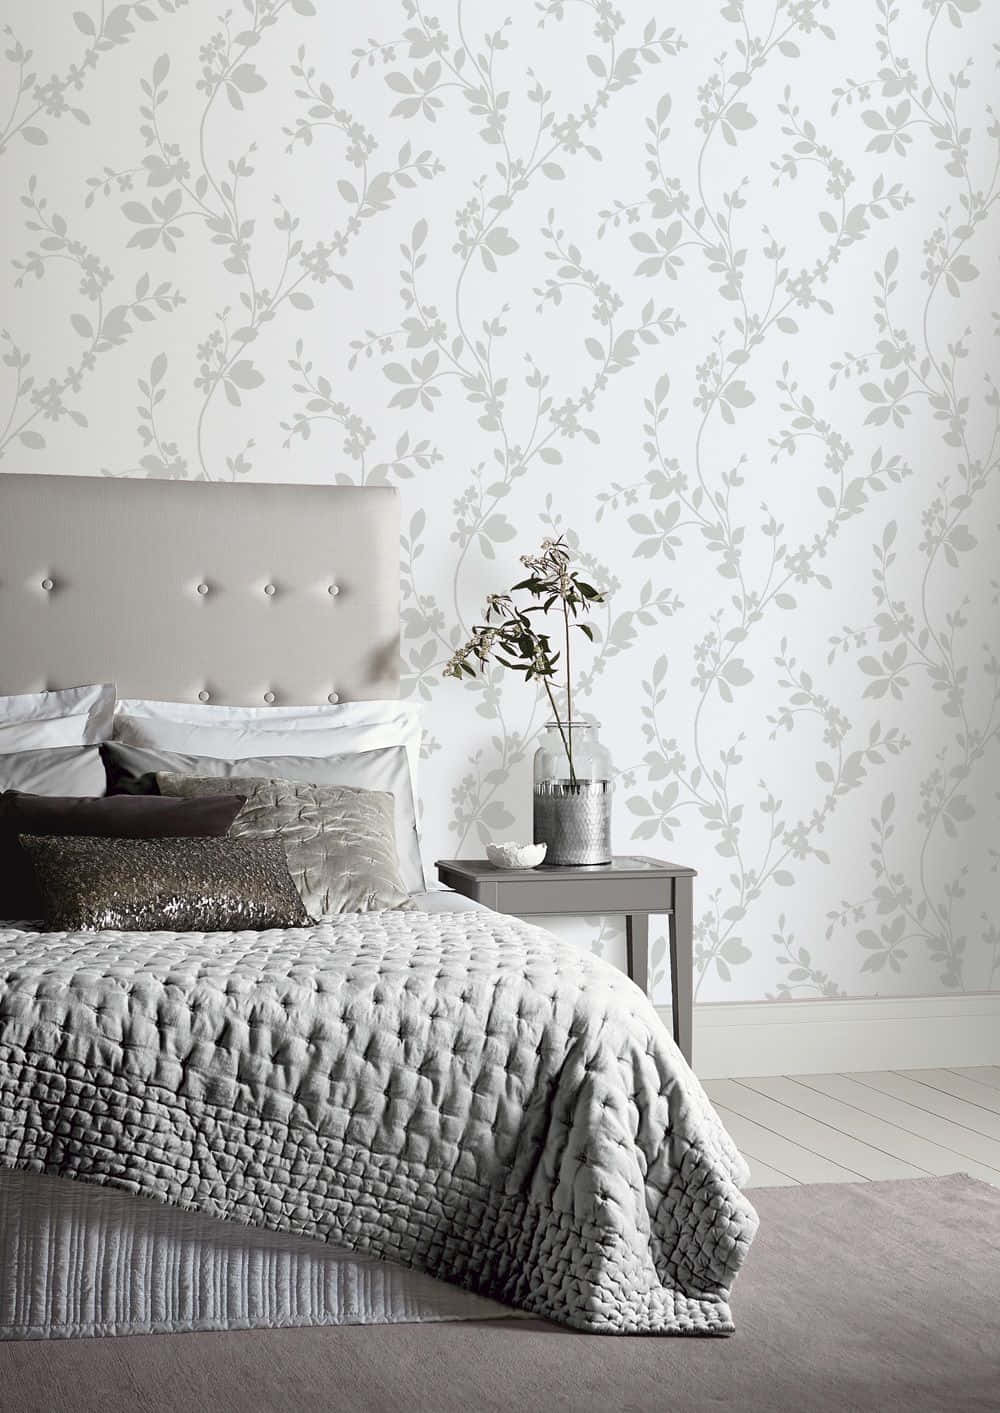 Monochrome Bed And Linens Wallpaper